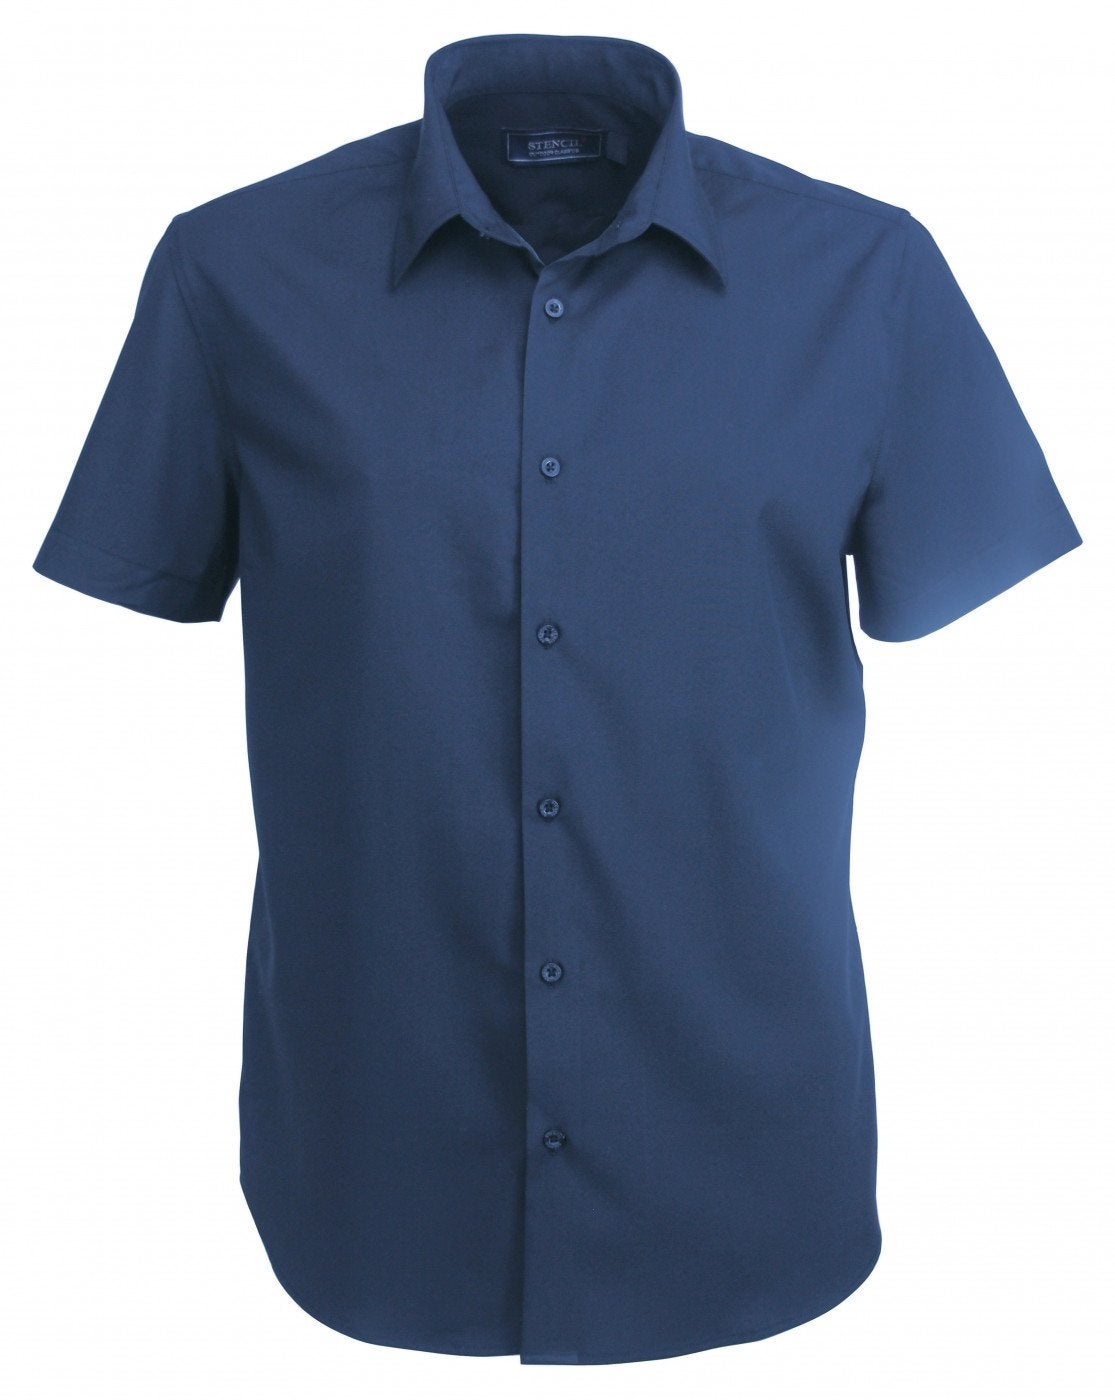 Mens Candidate Shirt S/S